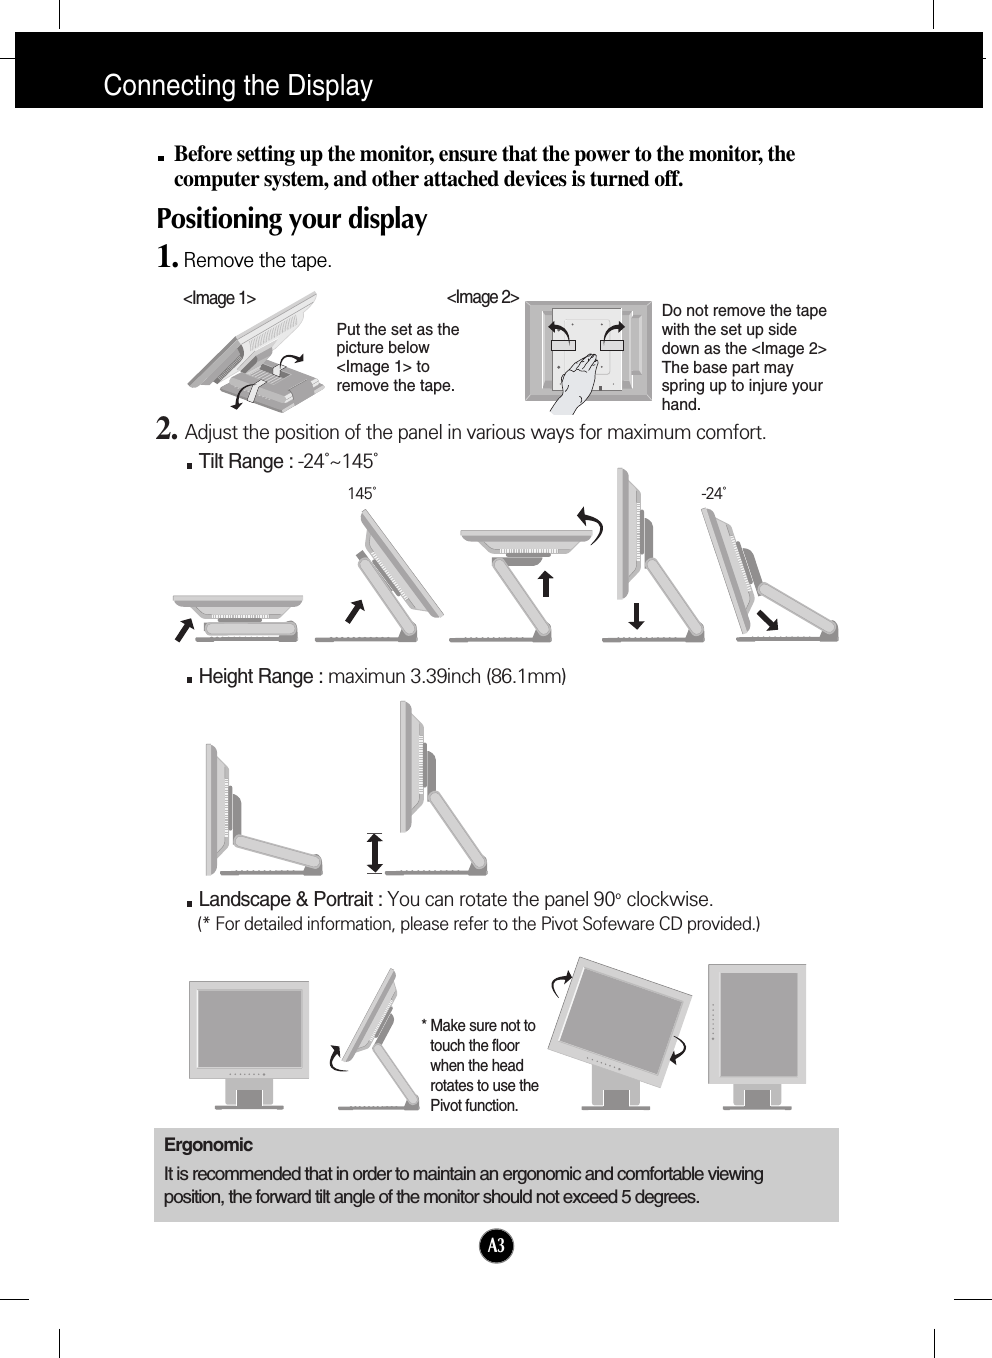 A3Connecting the DisplayBefore setting up the monitor, ensure that the power to the monitor, thecomputer system, and other attached devices is turned off. Positioning your display1.Remove the tape.ErgonomicIt is recommended that in order to maintain an ergonomic and comfortable viewingposition, the forward tilt angle of the monitor should not exceed 5 degrees.Height Range : maximun 3.39inch (86.1mm)Landscape &amp; Portrait : You can rotate the panel 90o  clockwise. (* For detailed information, please refer to the Pivot Sofeware CD provided.)2. Adjust the position of the panel in various ways for maximum comfort.Tilt Range : -24˚~145˚145˚ -24˚* Make sure not totouch the floorwhen the headrotates to use thePivot function.&lt;Image 1&gt;Put the set as thepicture below&lt;Image 1&gt; toremove the tape. Do not remove the tapewith the set up sidedown as the &lt;Image 2&gt;The base part mayspring up to injure yourhand. &lt;Image 2&gt;